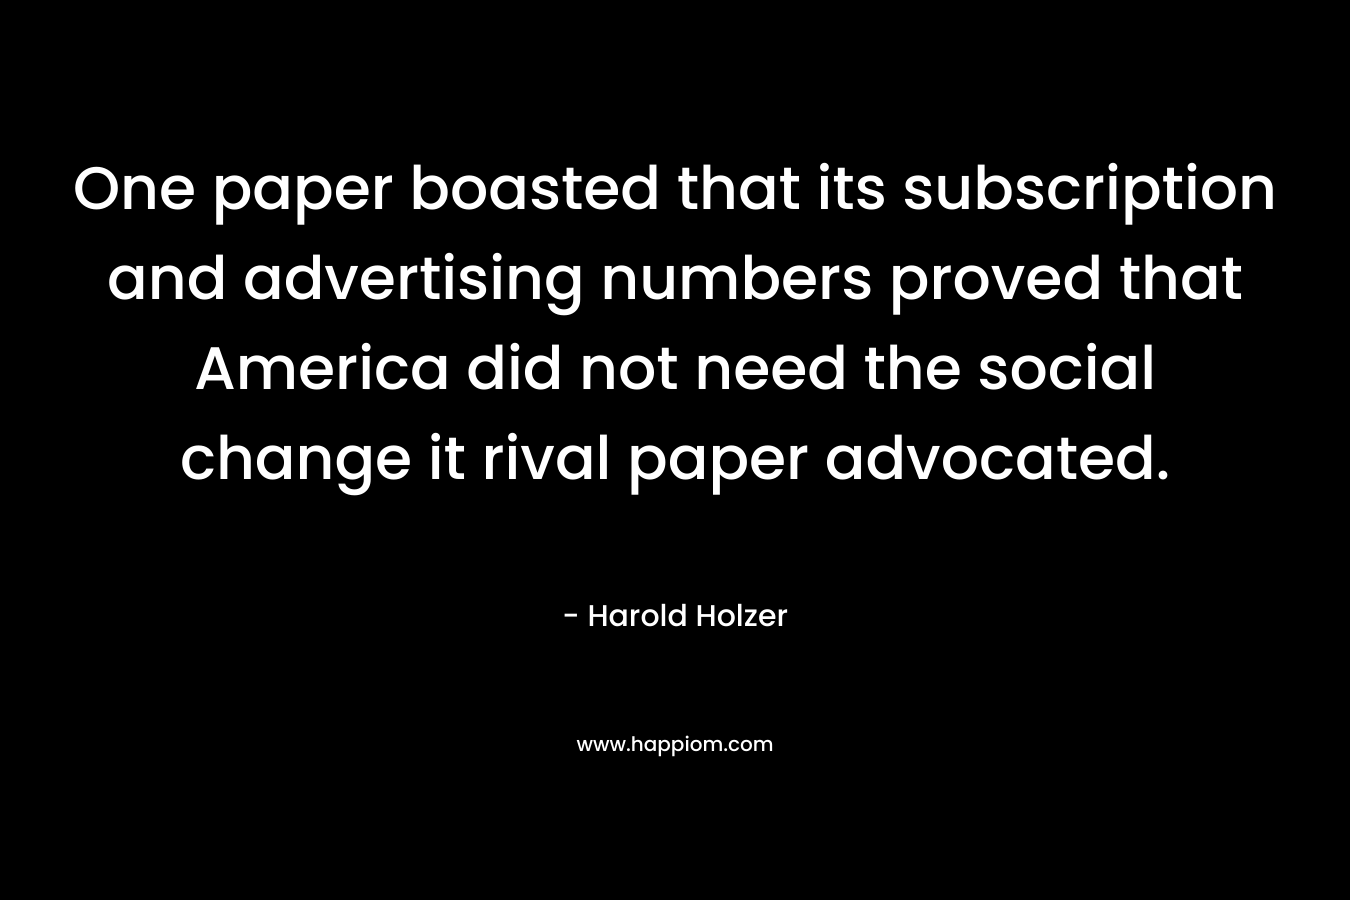 One paper boasted that its subscription and advertising numbers proved that America did not need the social change it rival paper advocated.